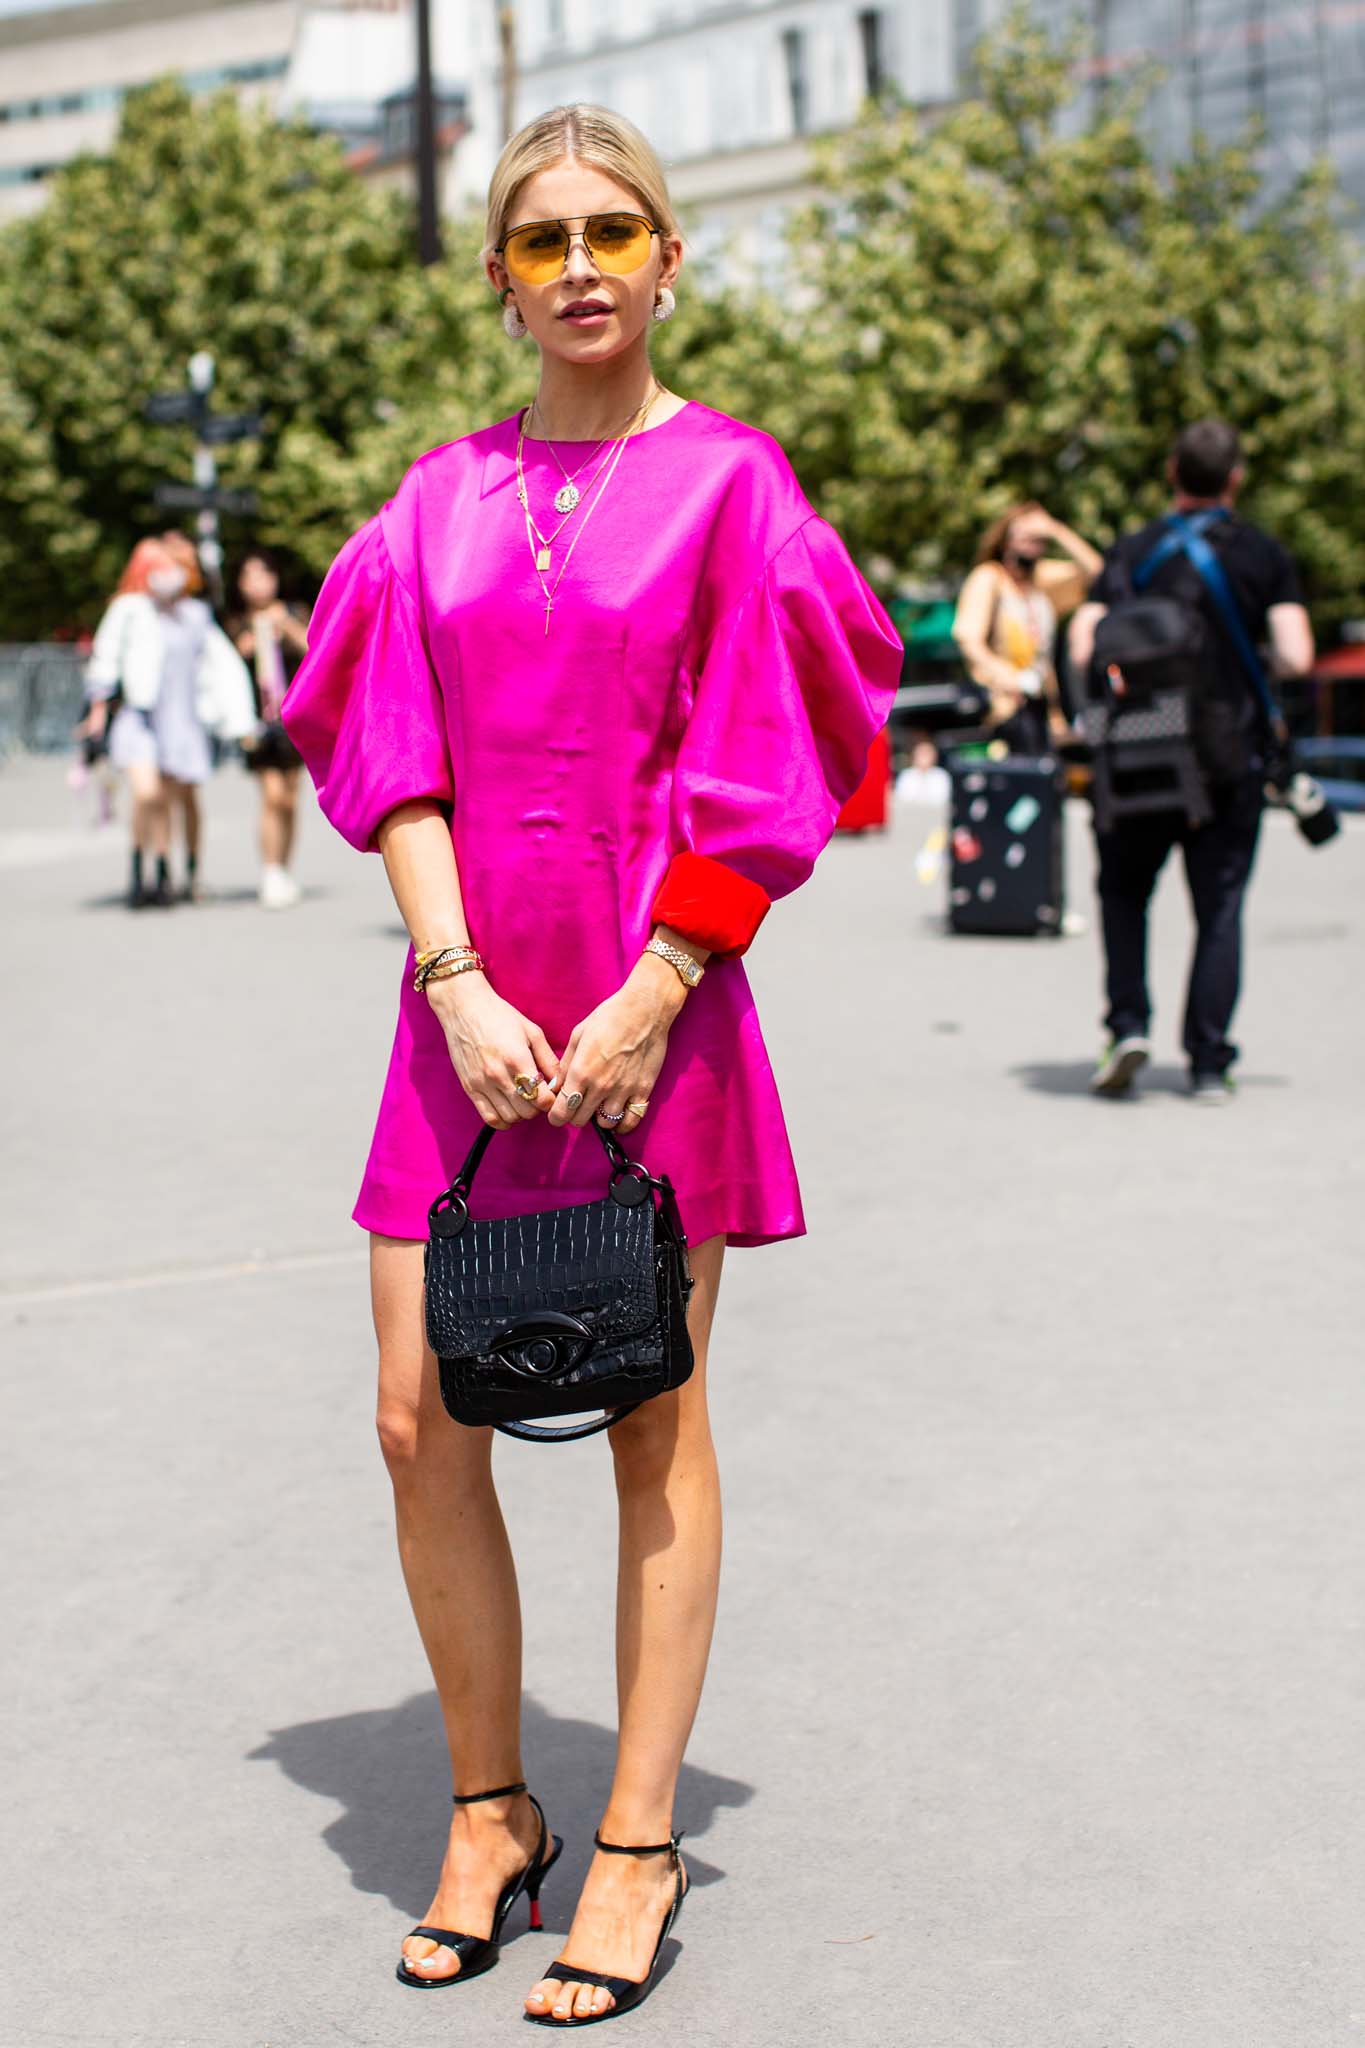 Neon Pink Outfits and Center Parts Are Everywhere This Summer | All ...